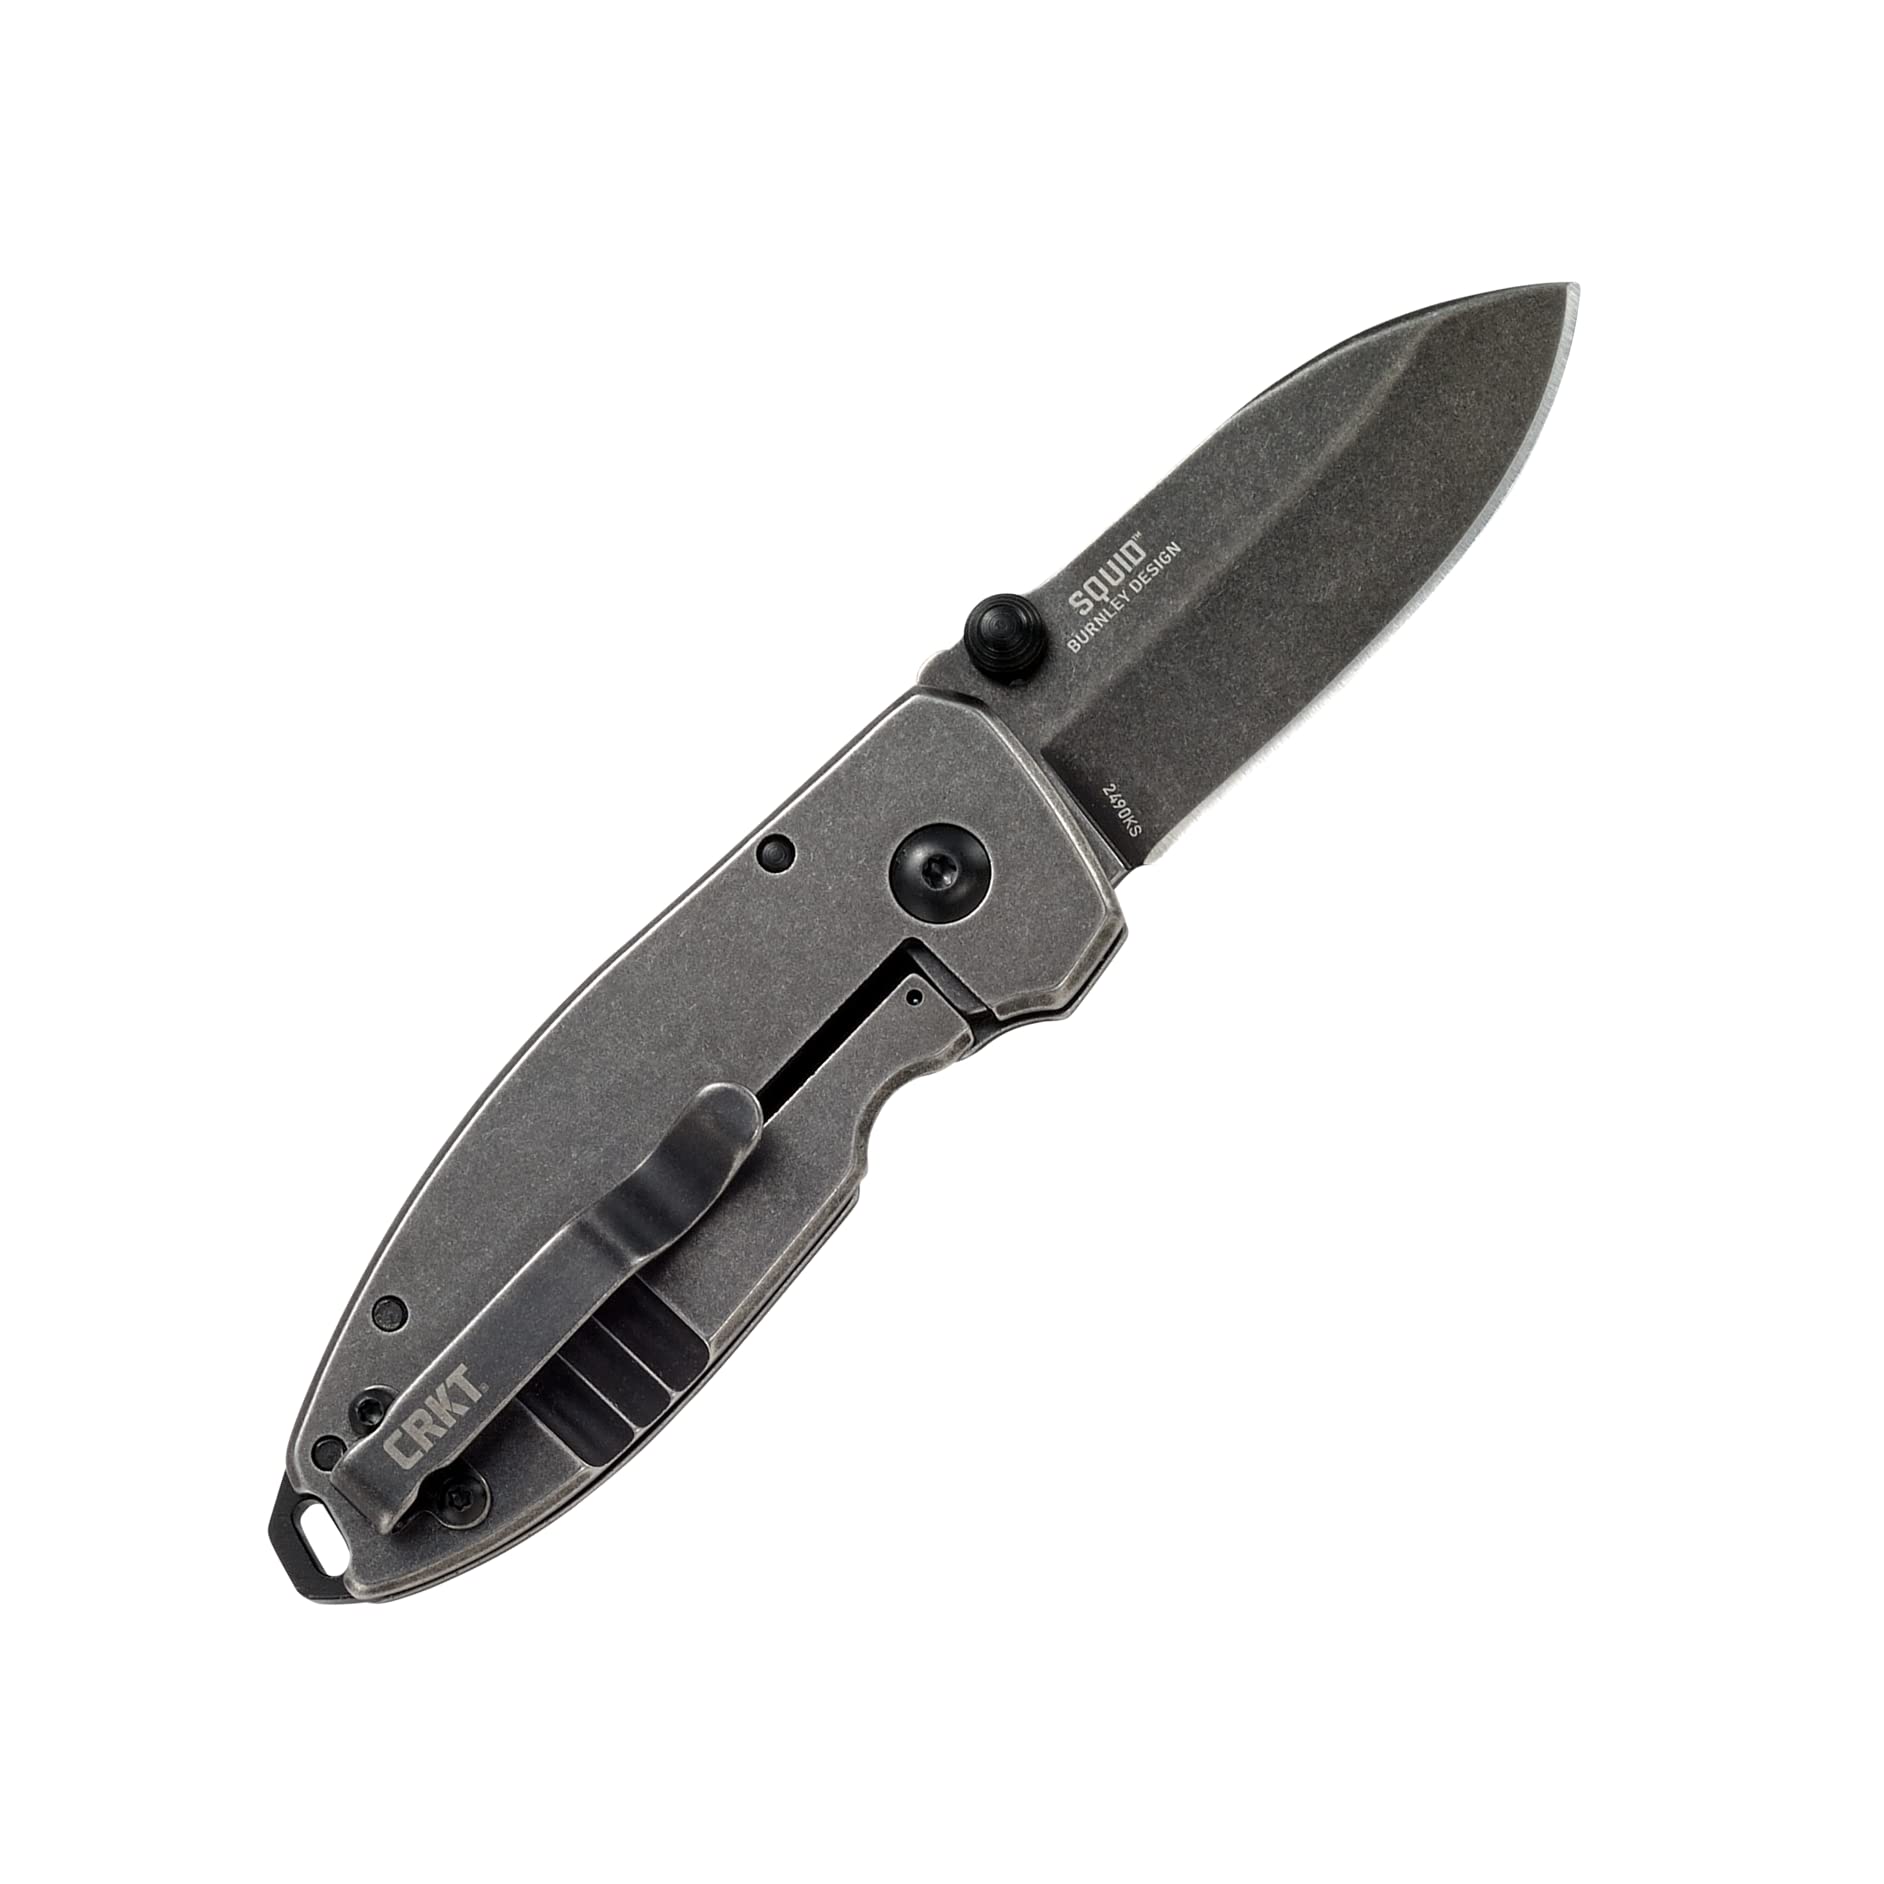 CRKT Squid Folding Pocket Knife: Compact EDC Straight Edge Utility Knife with Stainless Steel Blade and Framelock Handle